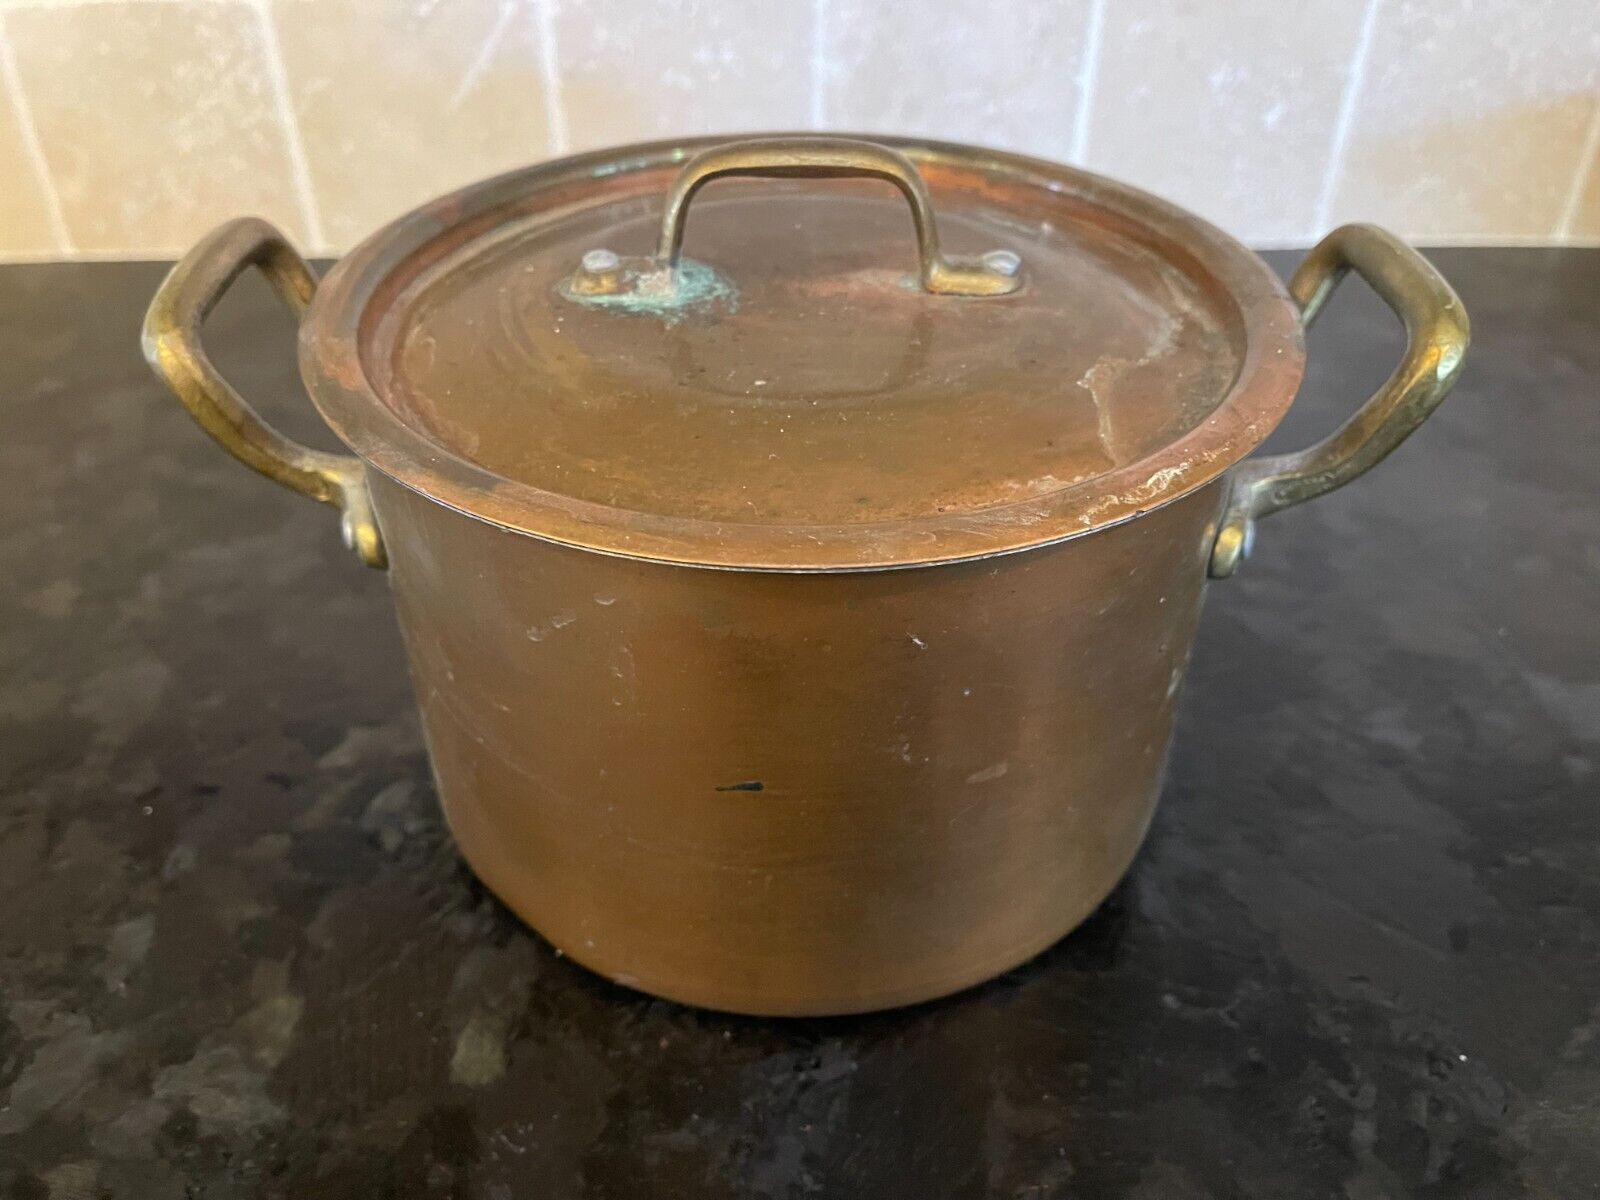 Small Vintage Copper Pot with 2 Brass Handles and Lid